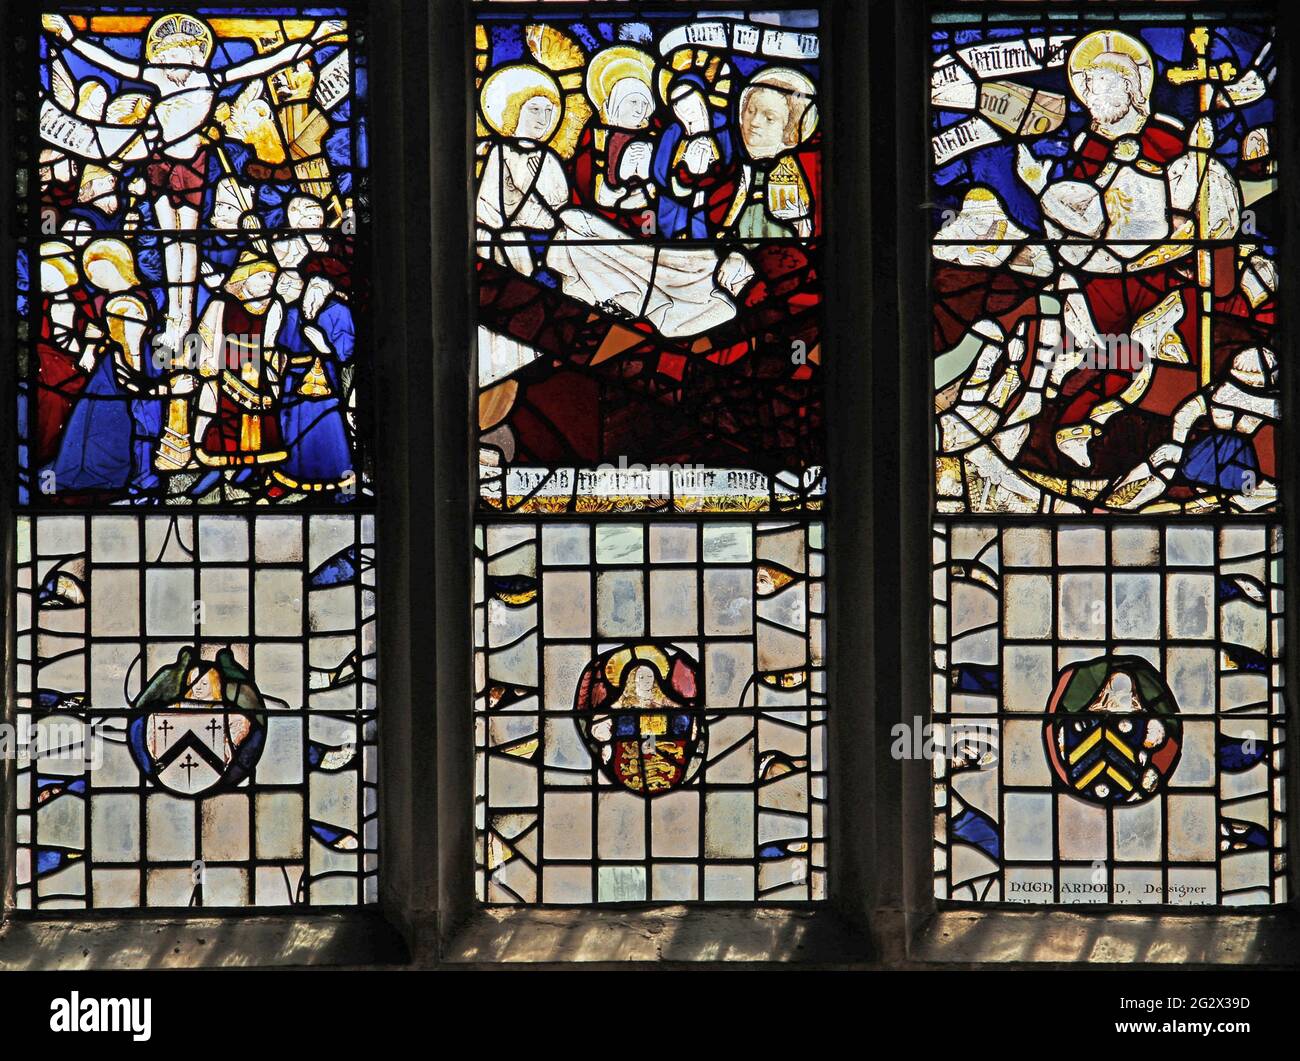 St Martin's Church, Stamford; 15th Century Stained Glass depicting, the Crucifixion, three Maries at the Tomb of Christ, and The Resurrection of Chris. Stock Photo